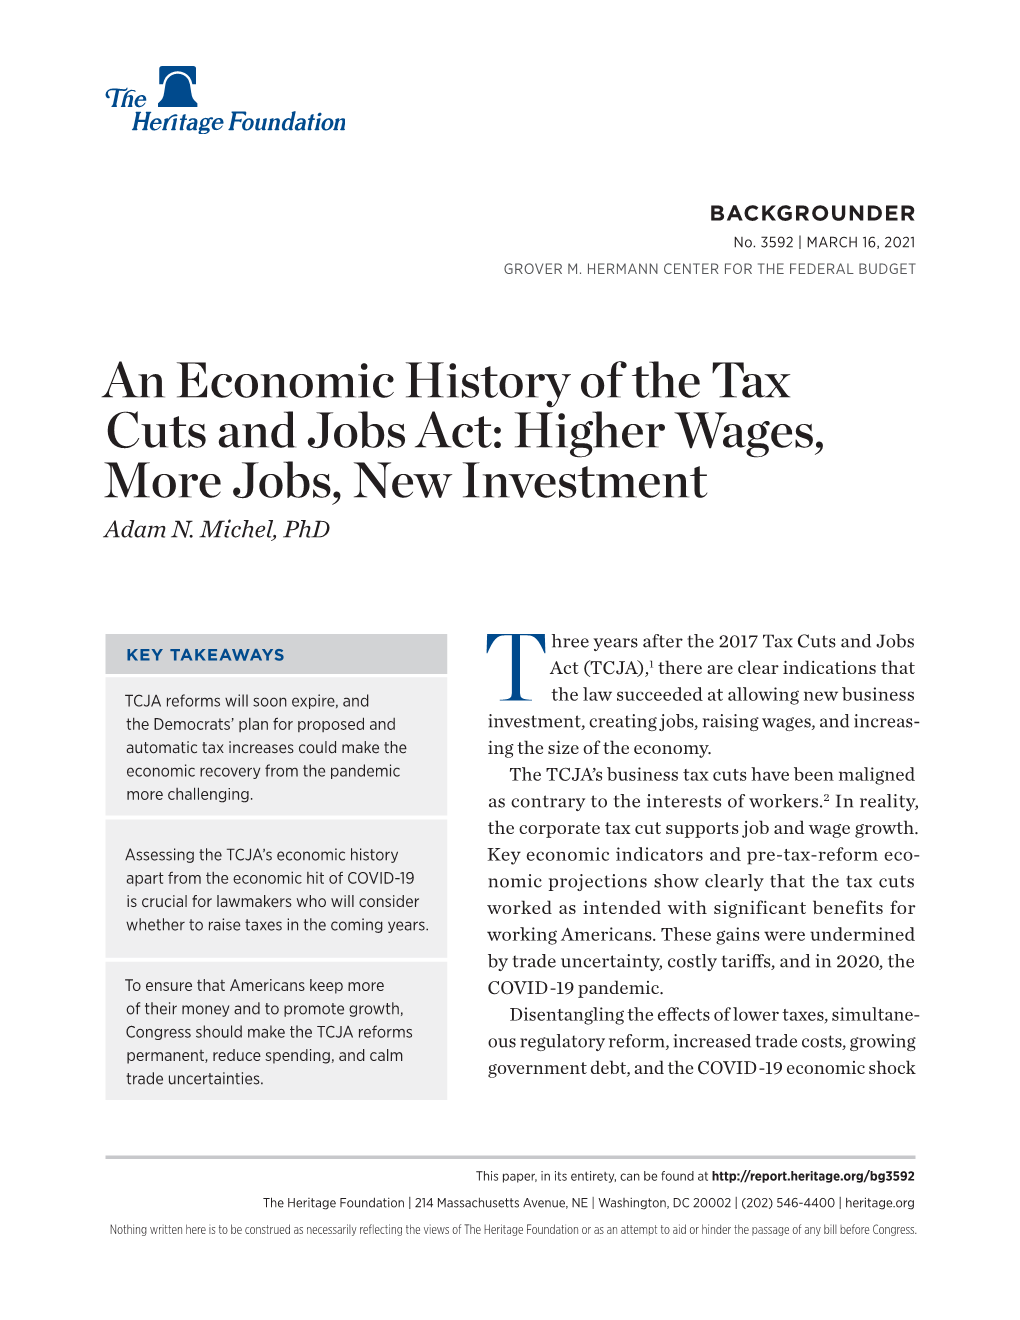 An Economic History of the Tax Cuts and Jobs Act: Higher Wages, More Jobs, New Investment Adam N